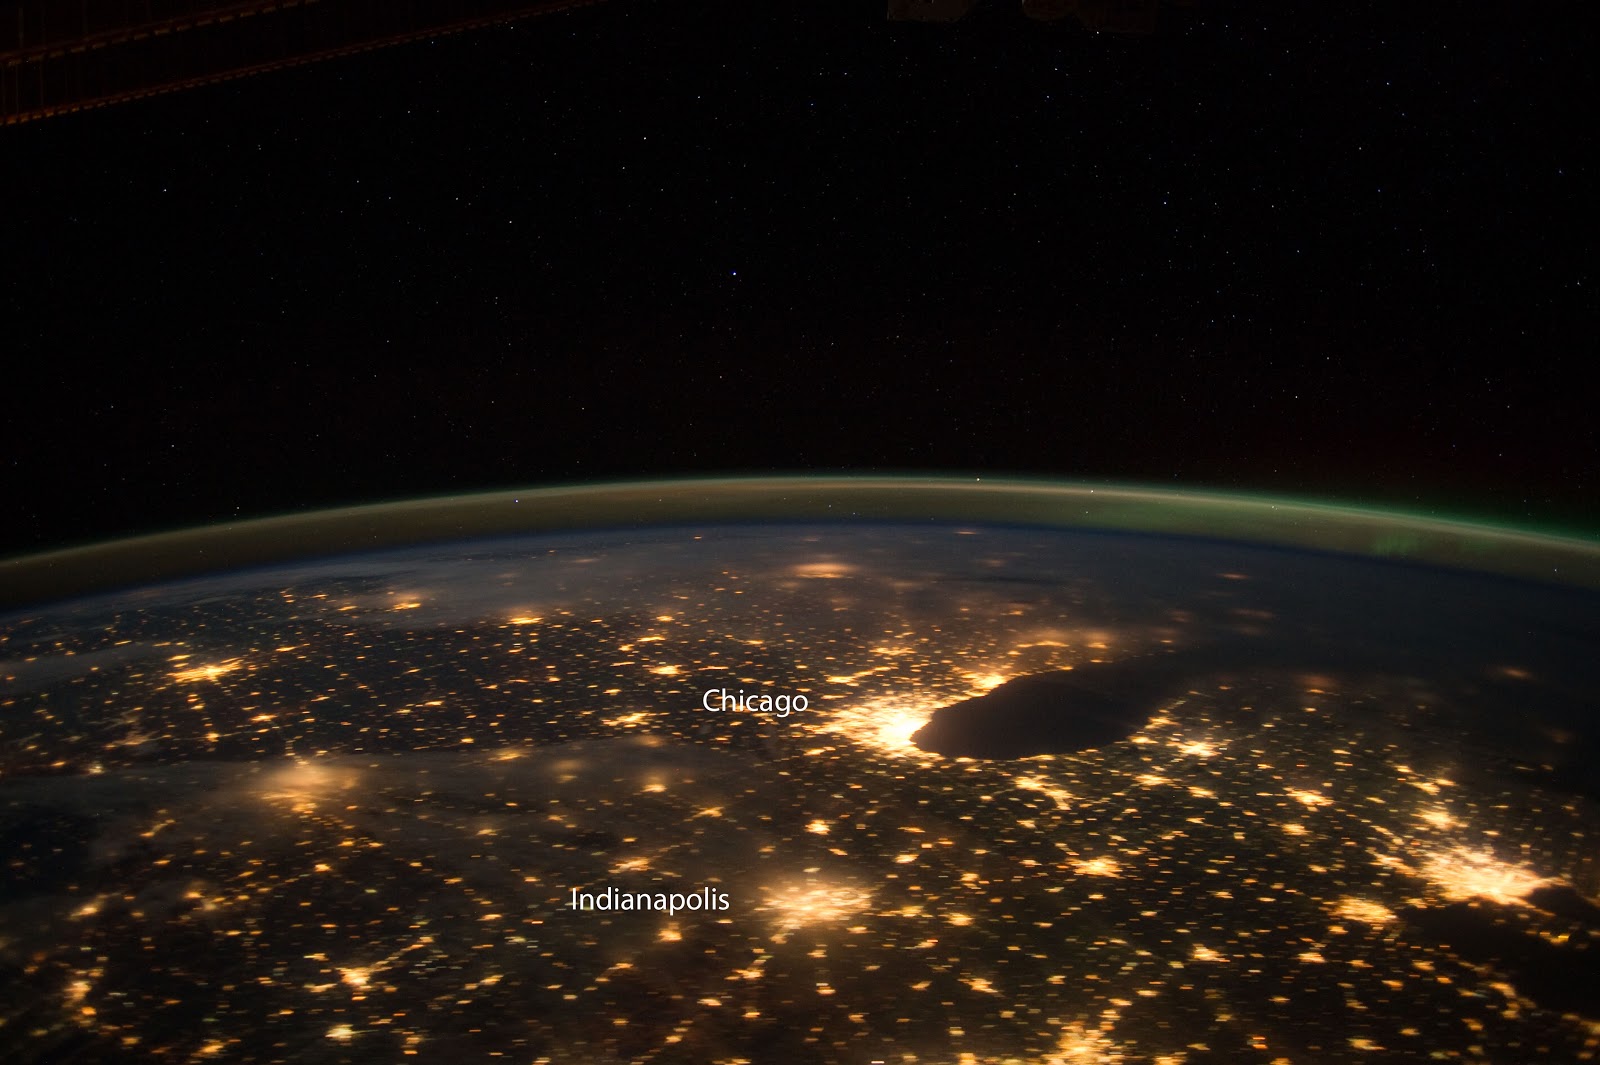 Chicago and Indianapolis from space at night